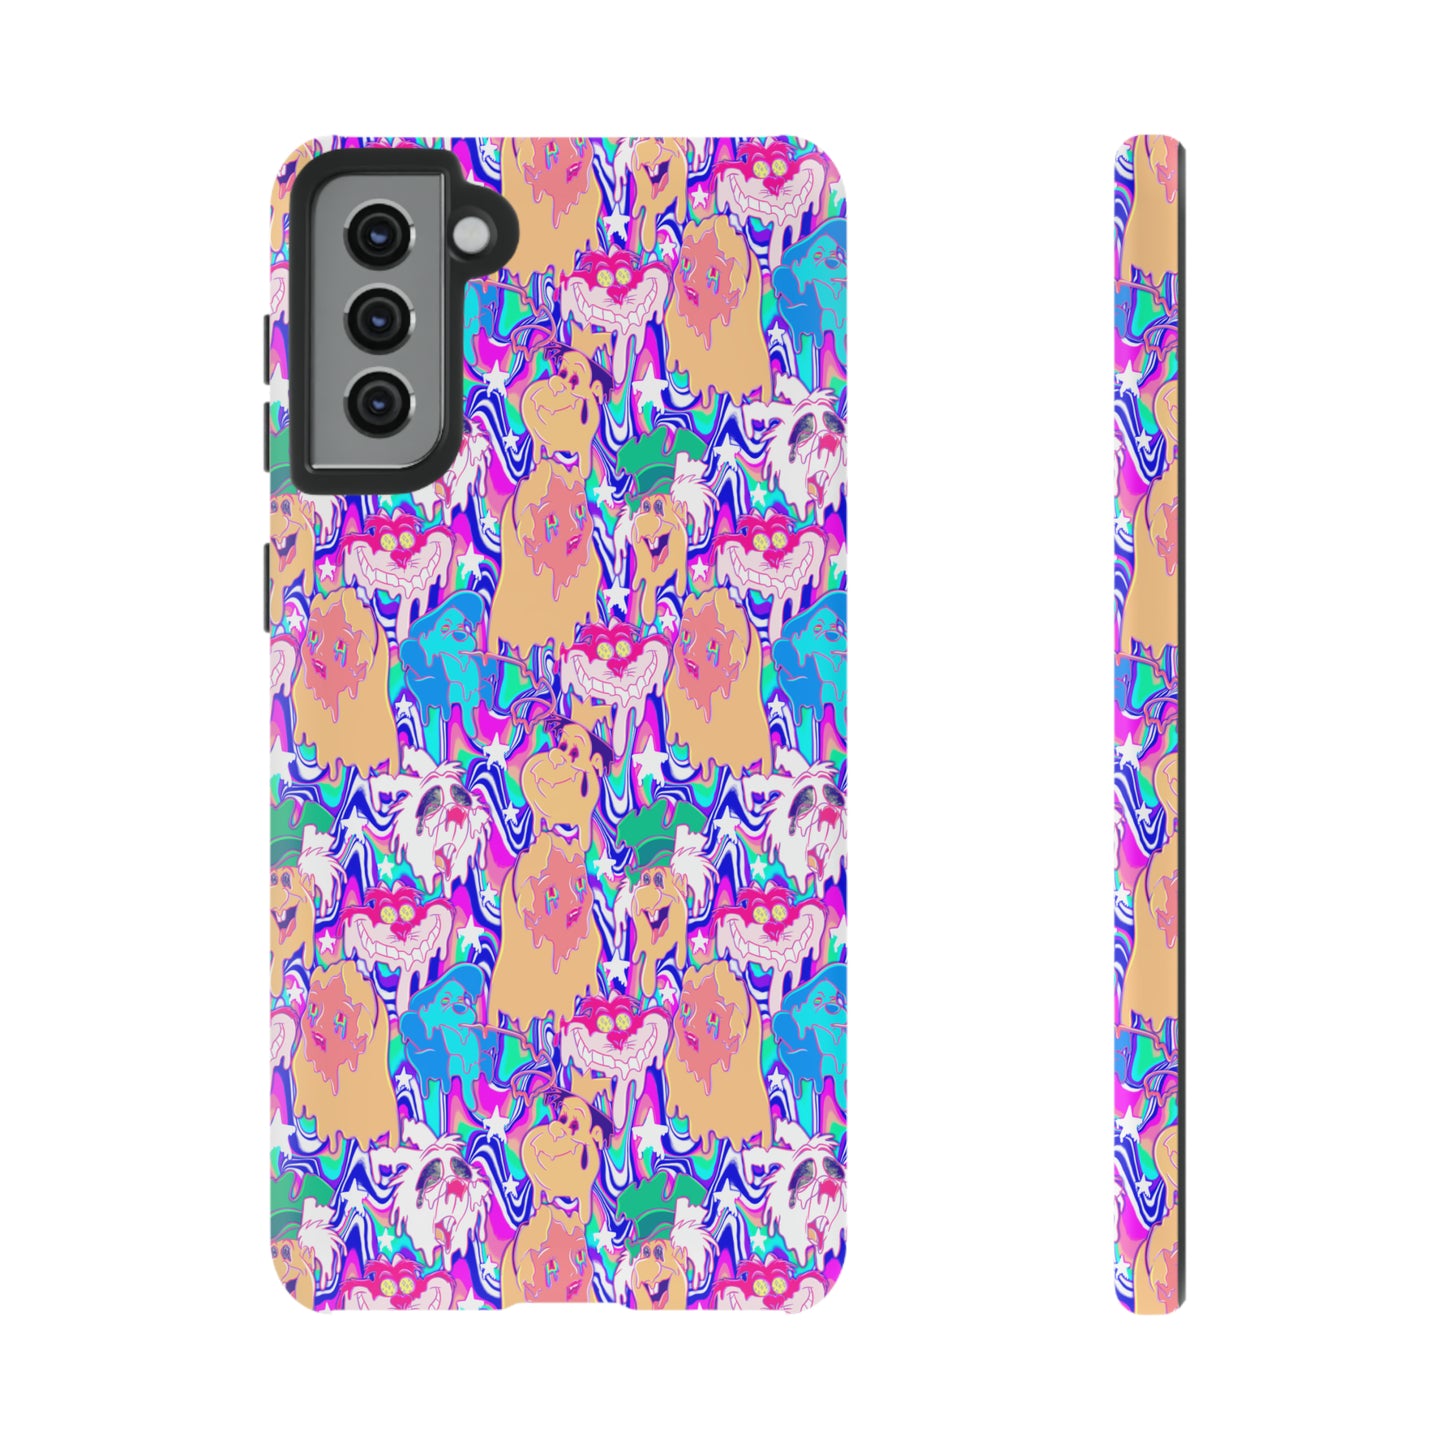 Tripy Tough Phone Case for Iphones, Samsungs, and Google phones